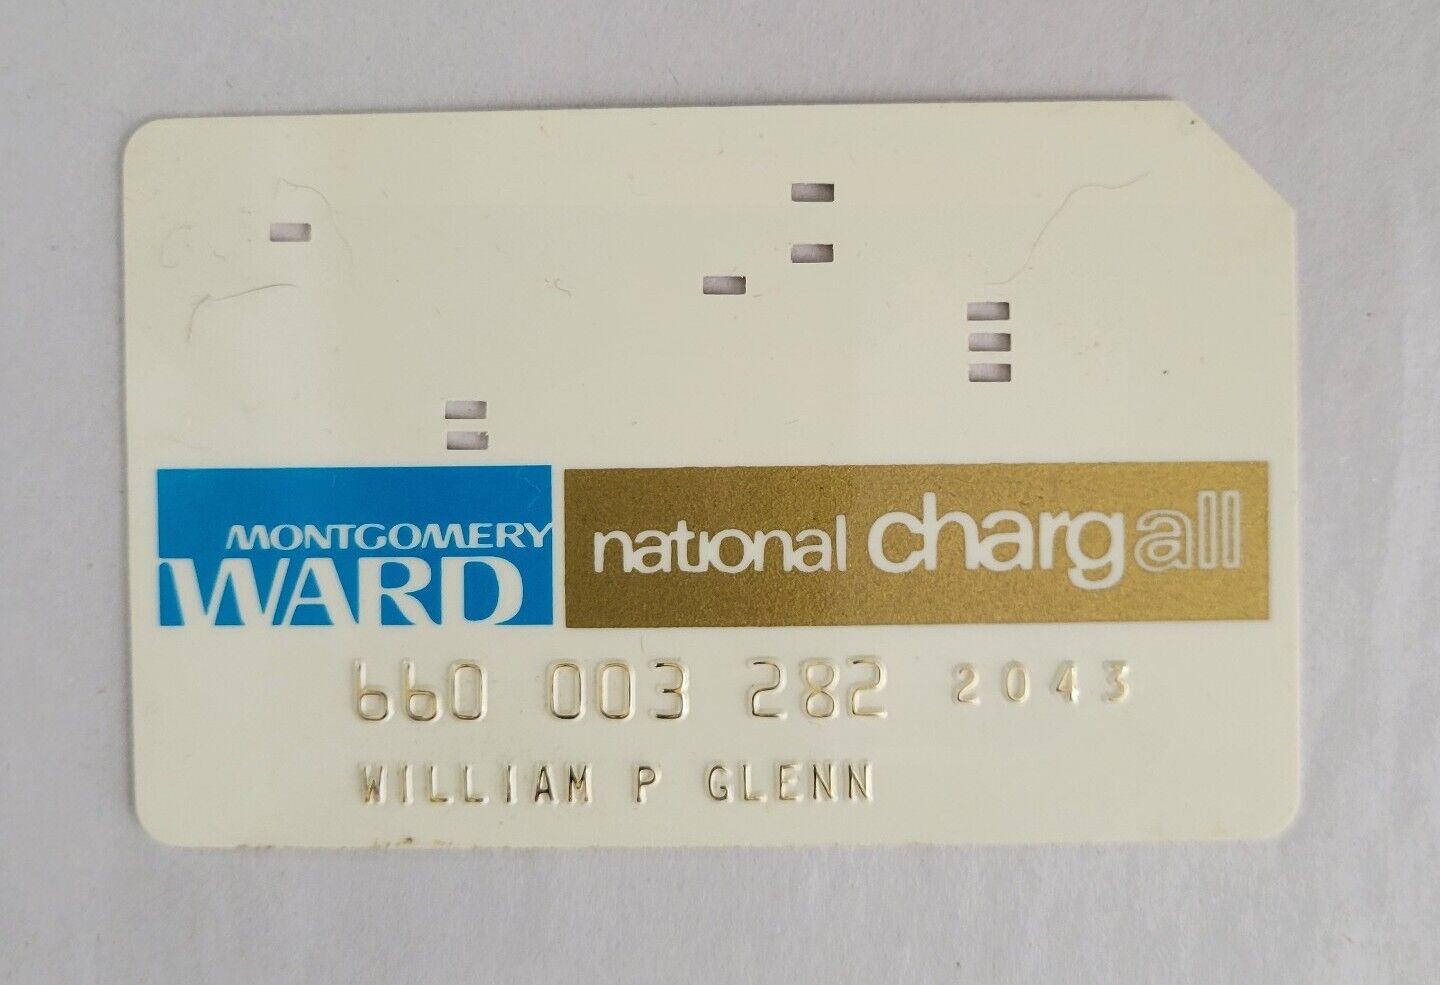 Vintage 1960s Montgomery Ward National Charg-all Credit Card